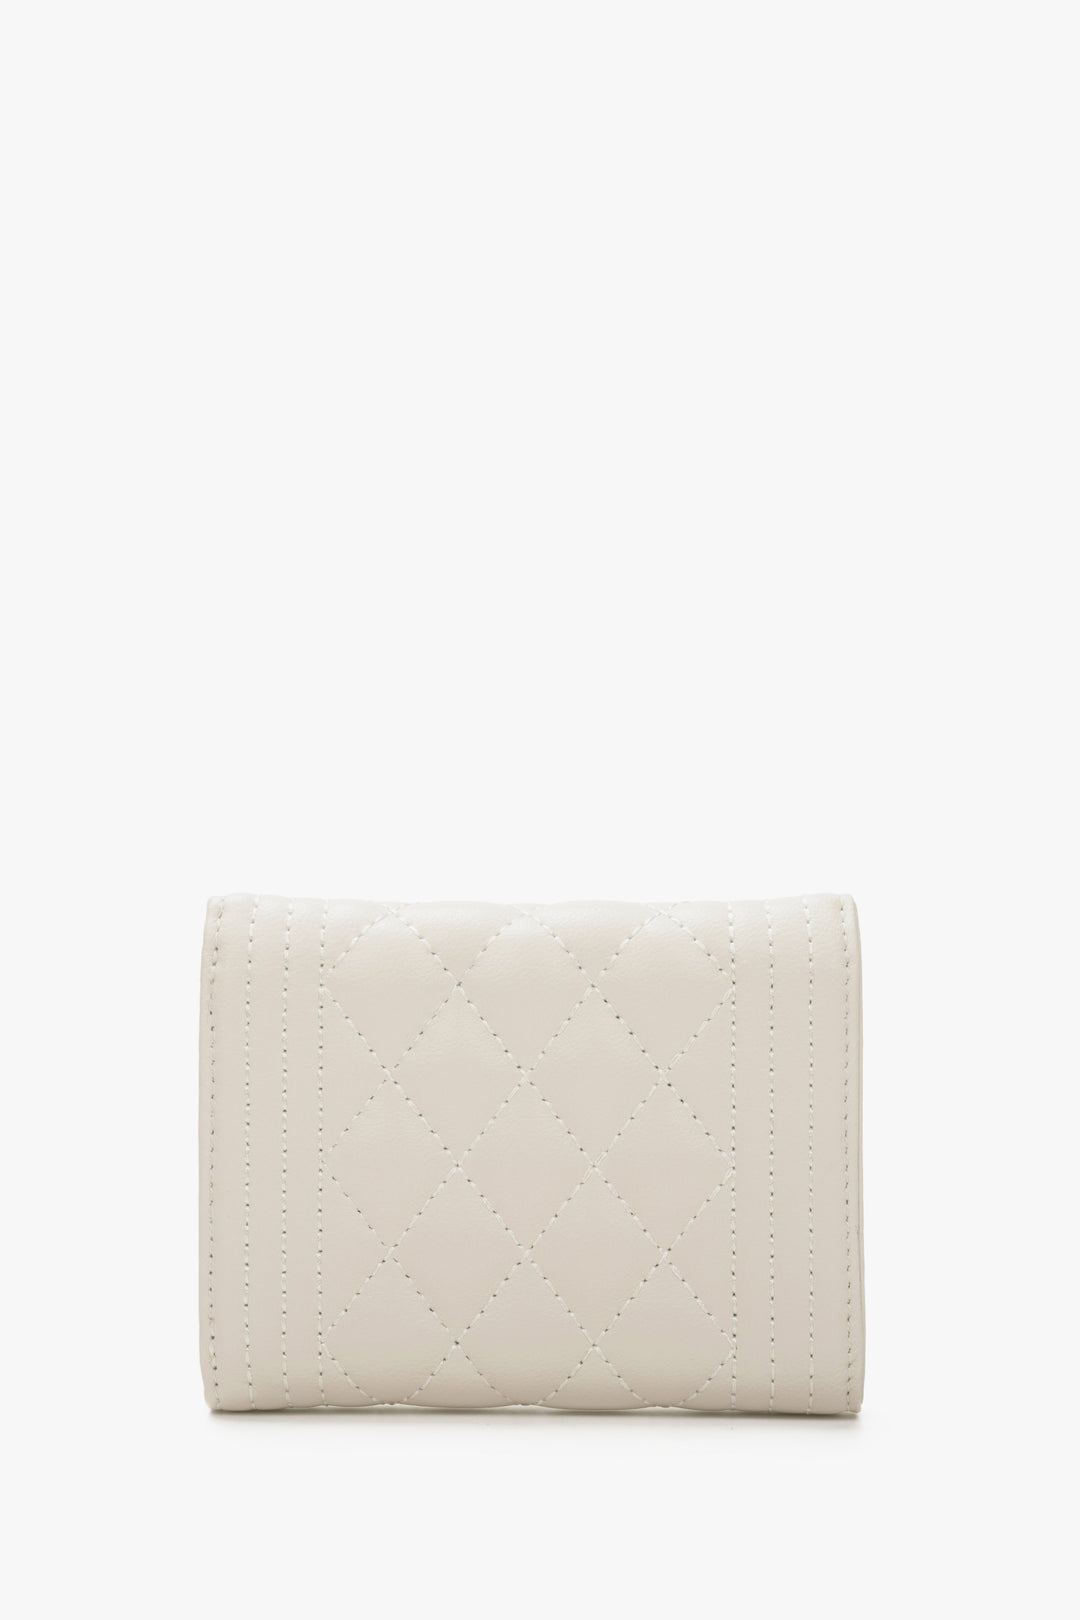 Women's small light beige wallet with embossing - back.